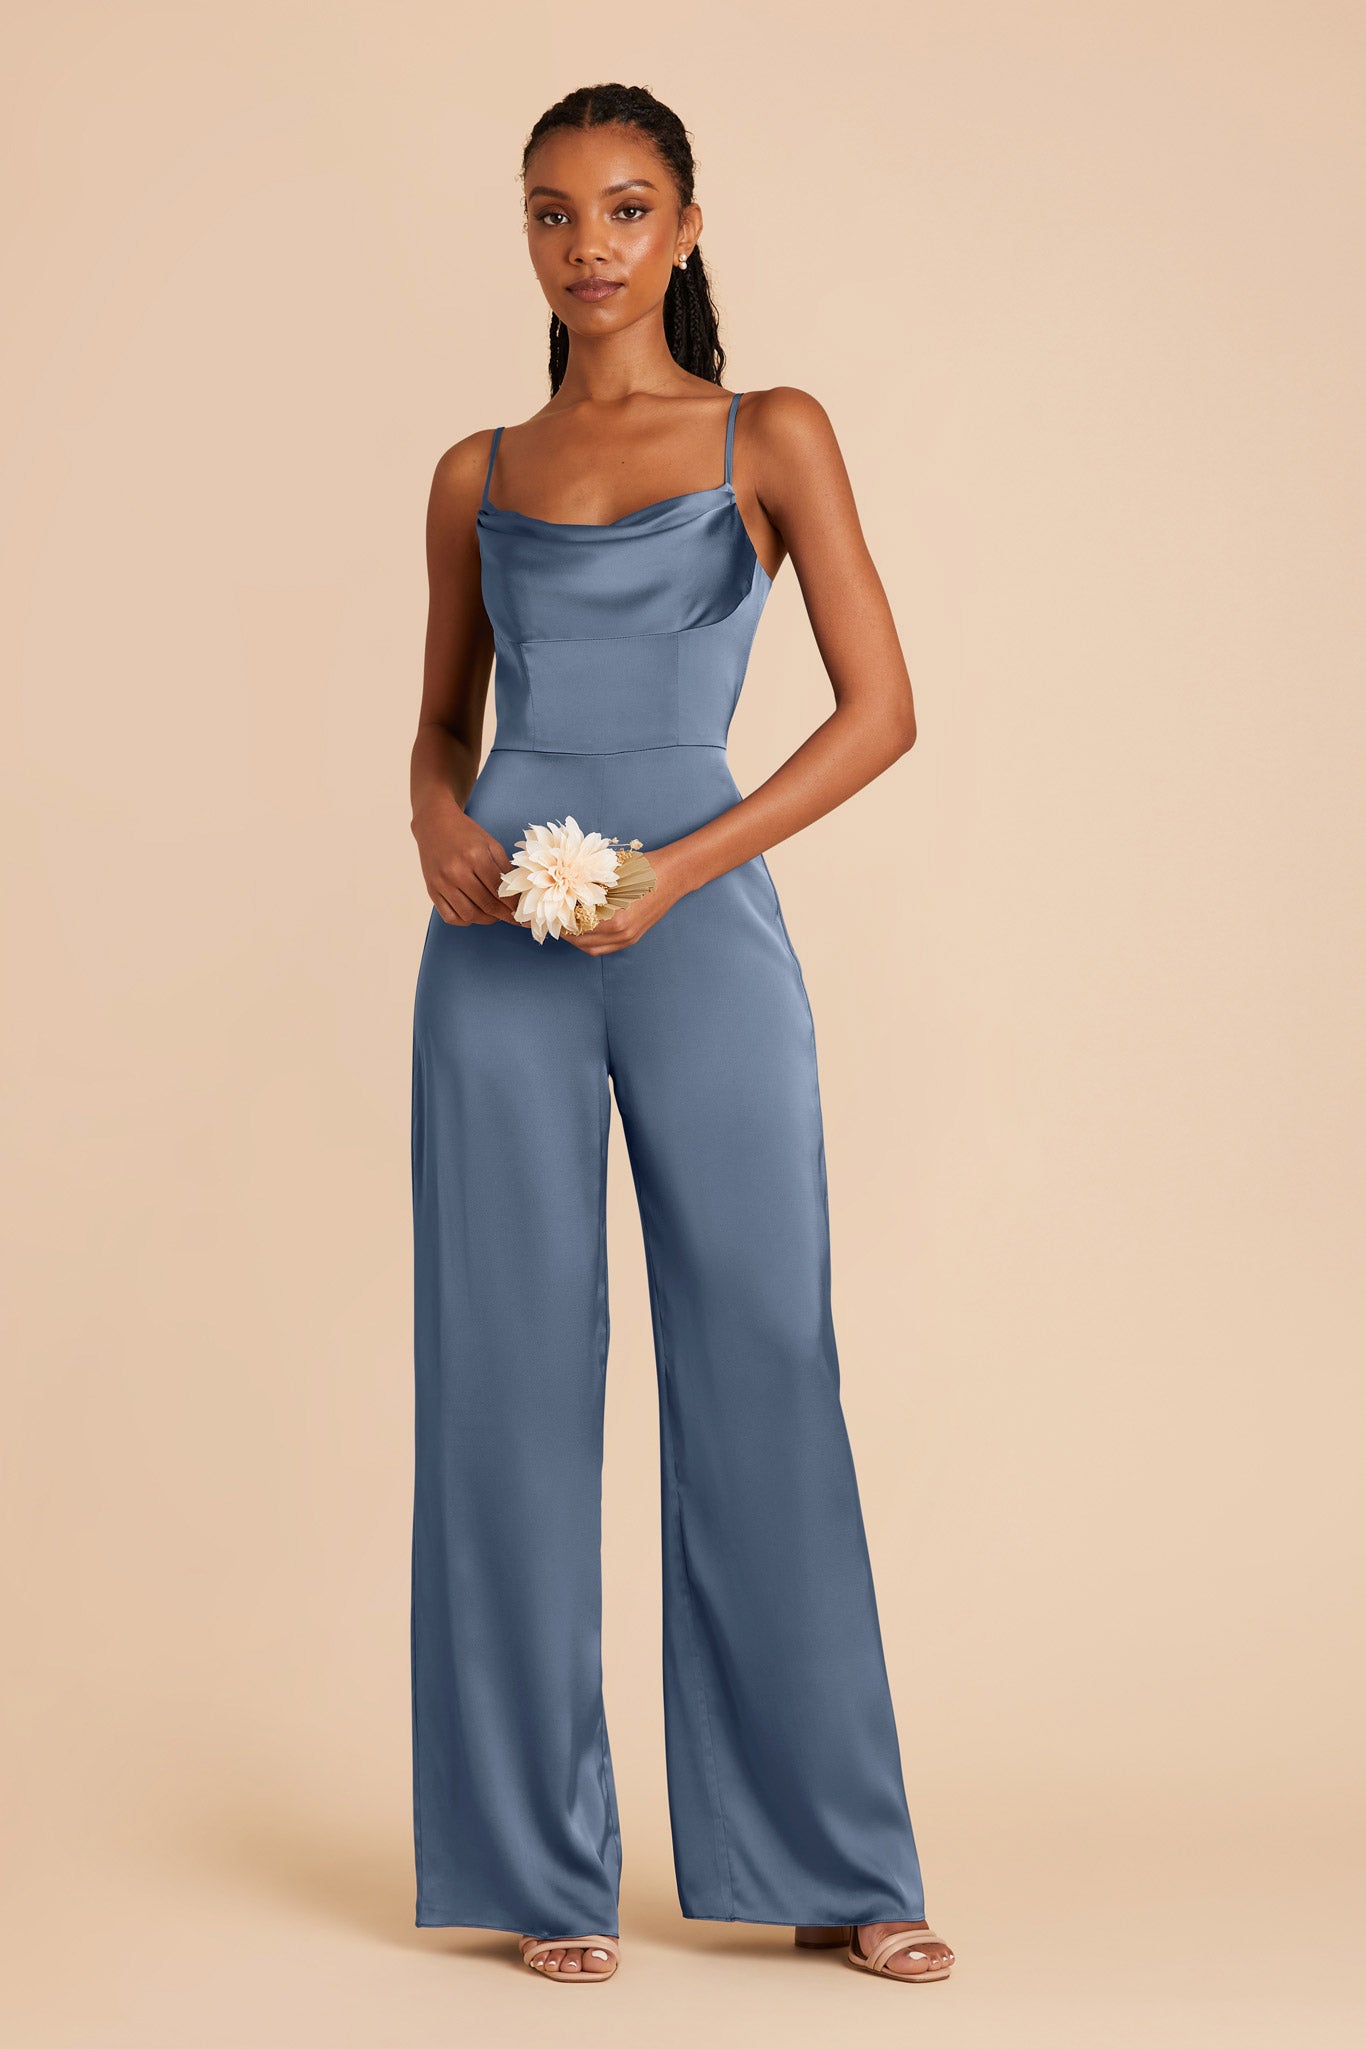 French Blue Donna Matte Satin Bridesmaid Jumpsuit by Birdy Grey